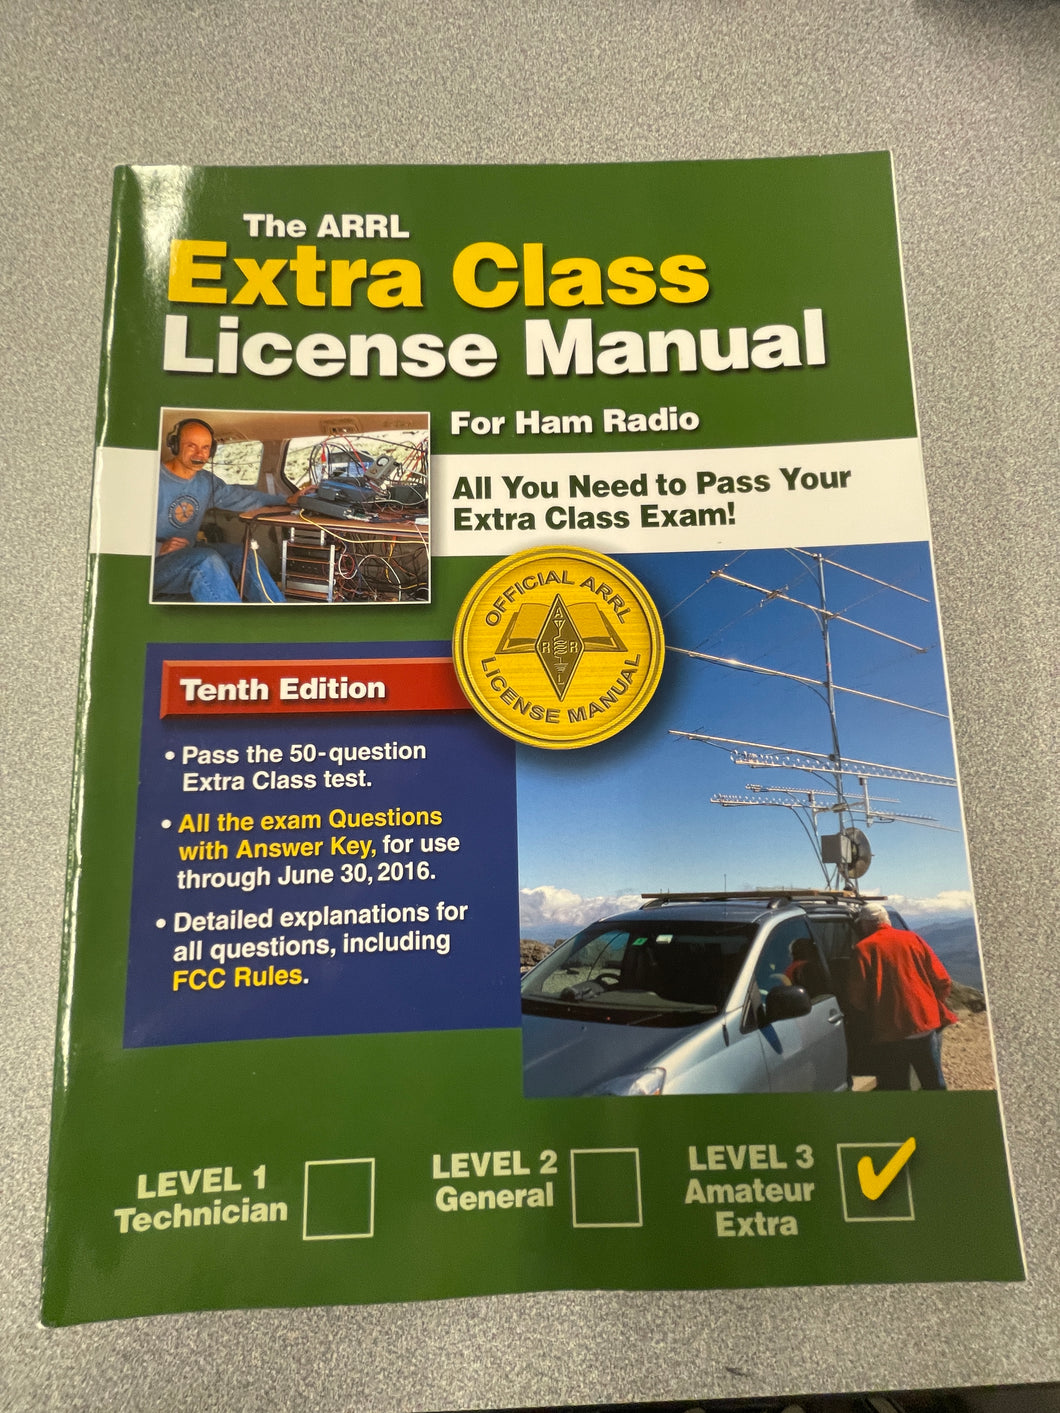 AARL Extra Class License Manual for Ham Radio: All You Need To Pass Your Extra Class Exam, AARL [2012] CG 2/24